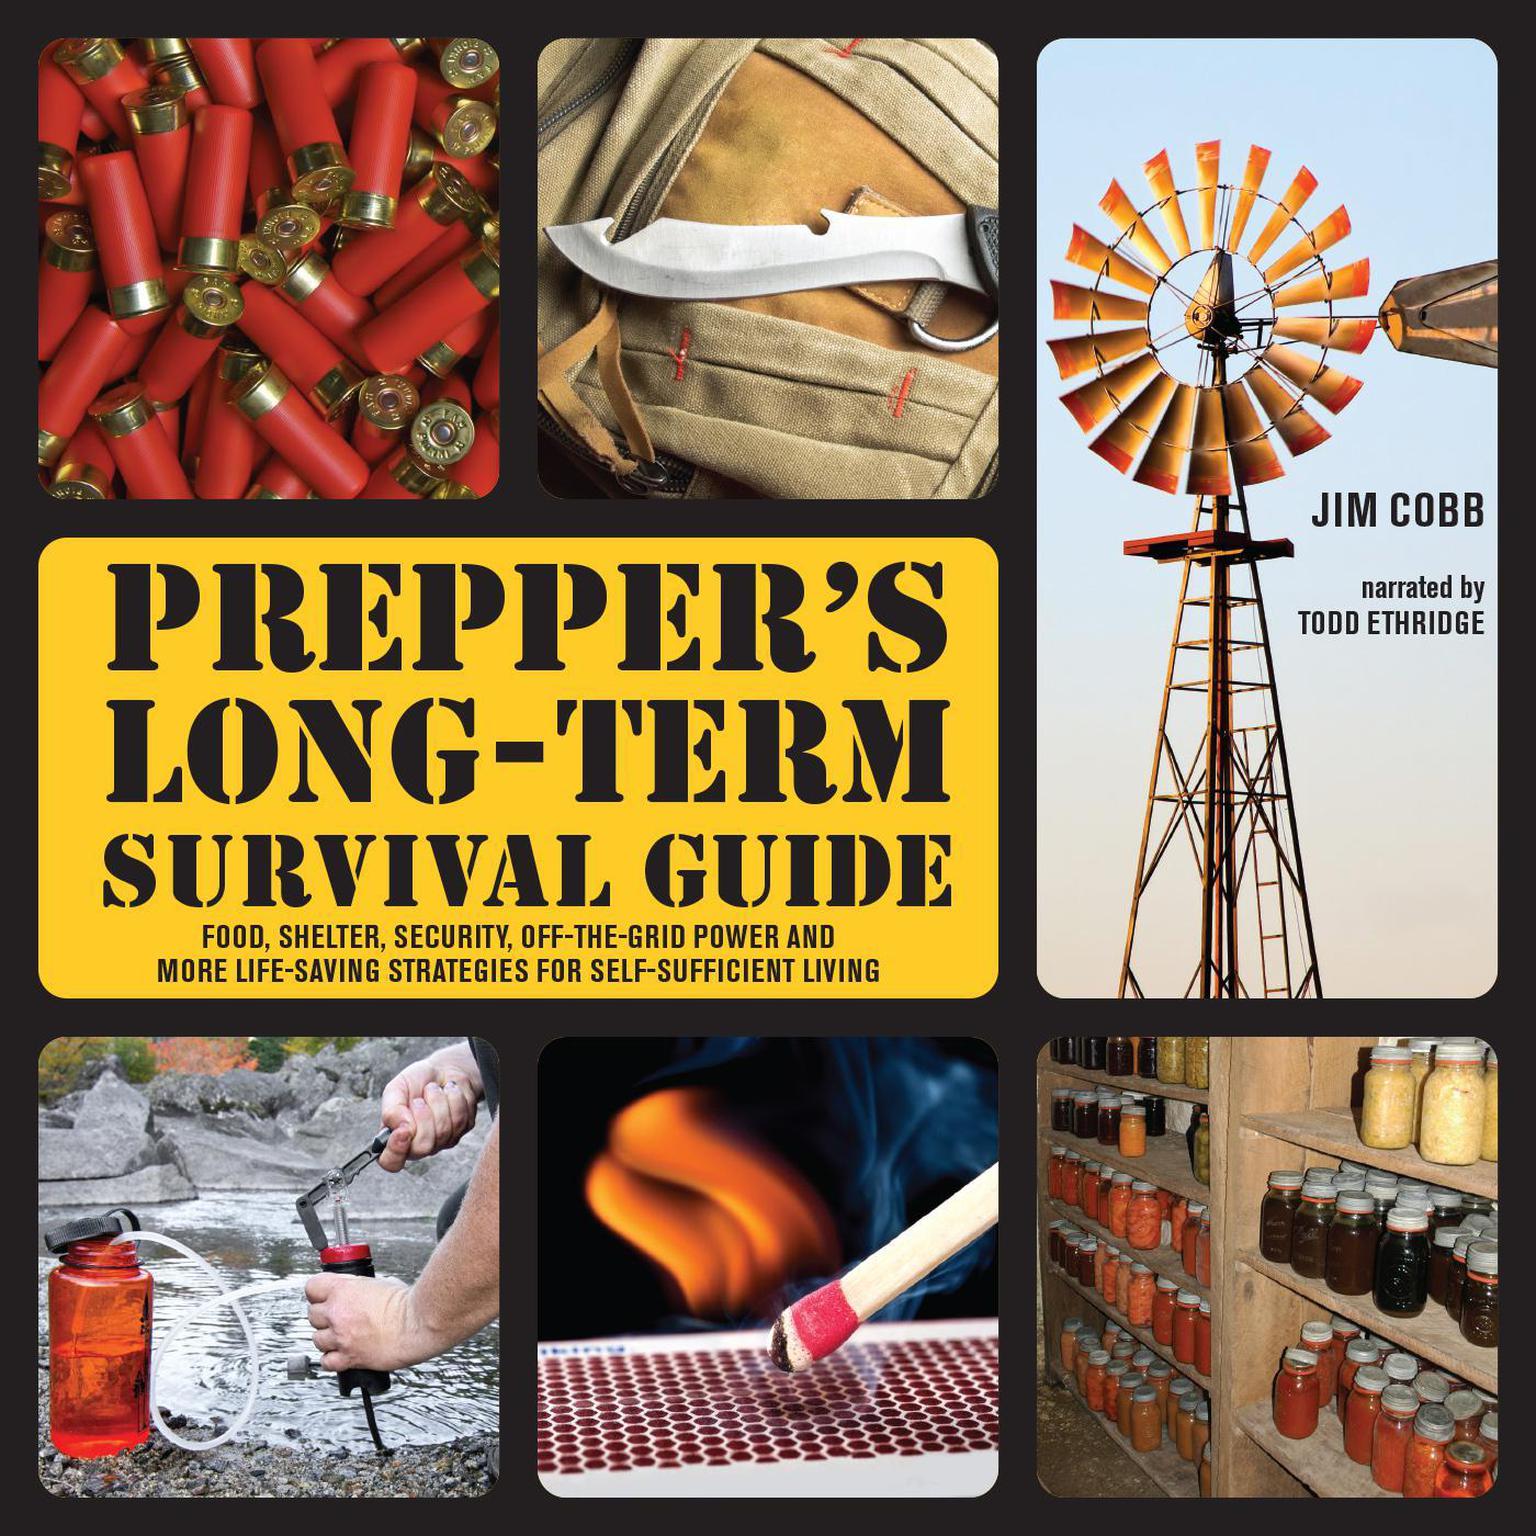 Preppers Long-Term Survival Guide: Food, Shelter, Security, Off-the-Grid Power and More Life-Saving Strategies for Self-Sufficient Living Audiobook, by Jim Cobb